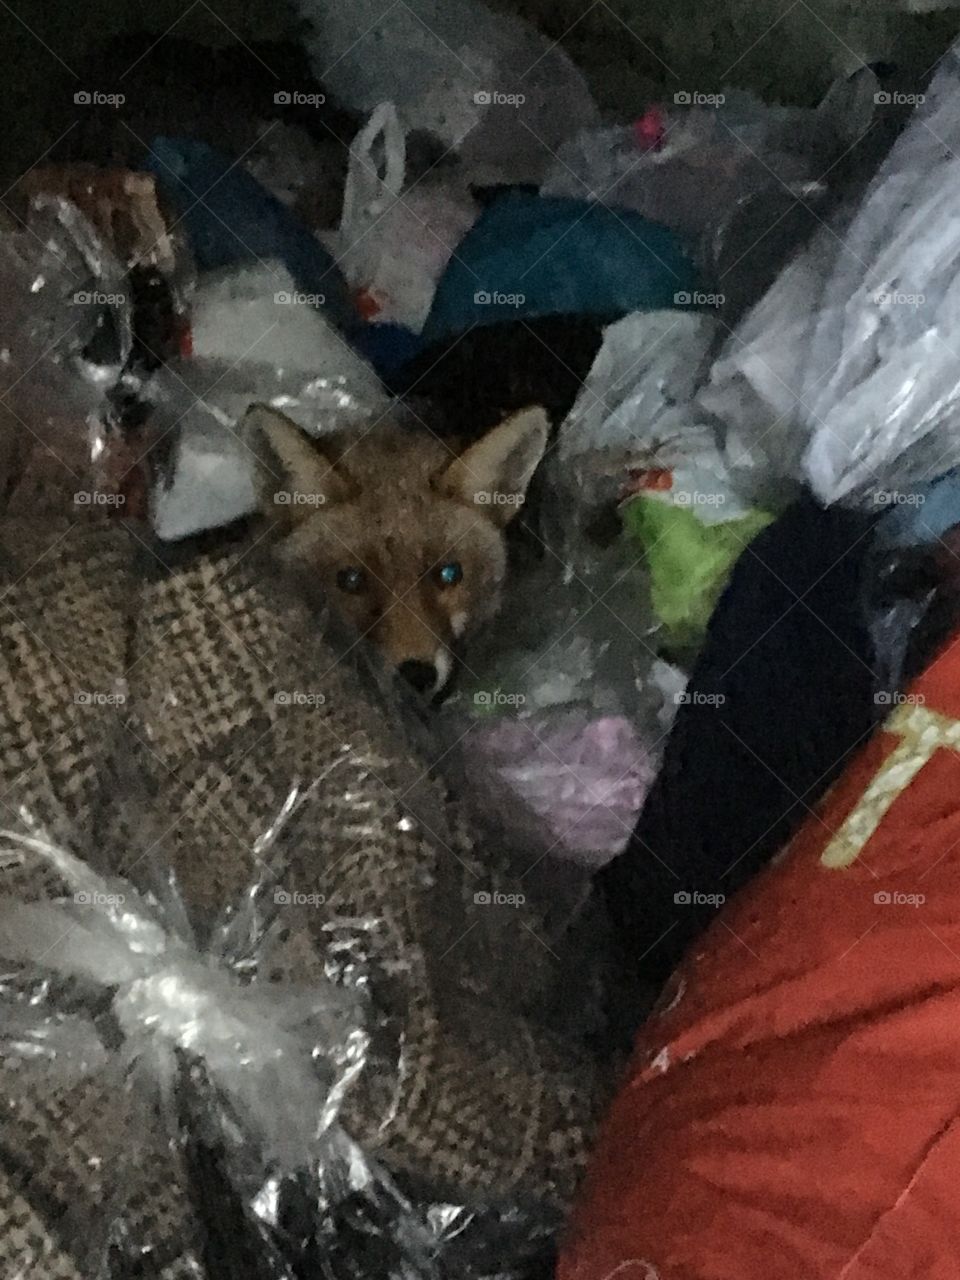 Local wildlife fox in our recycling container at work 